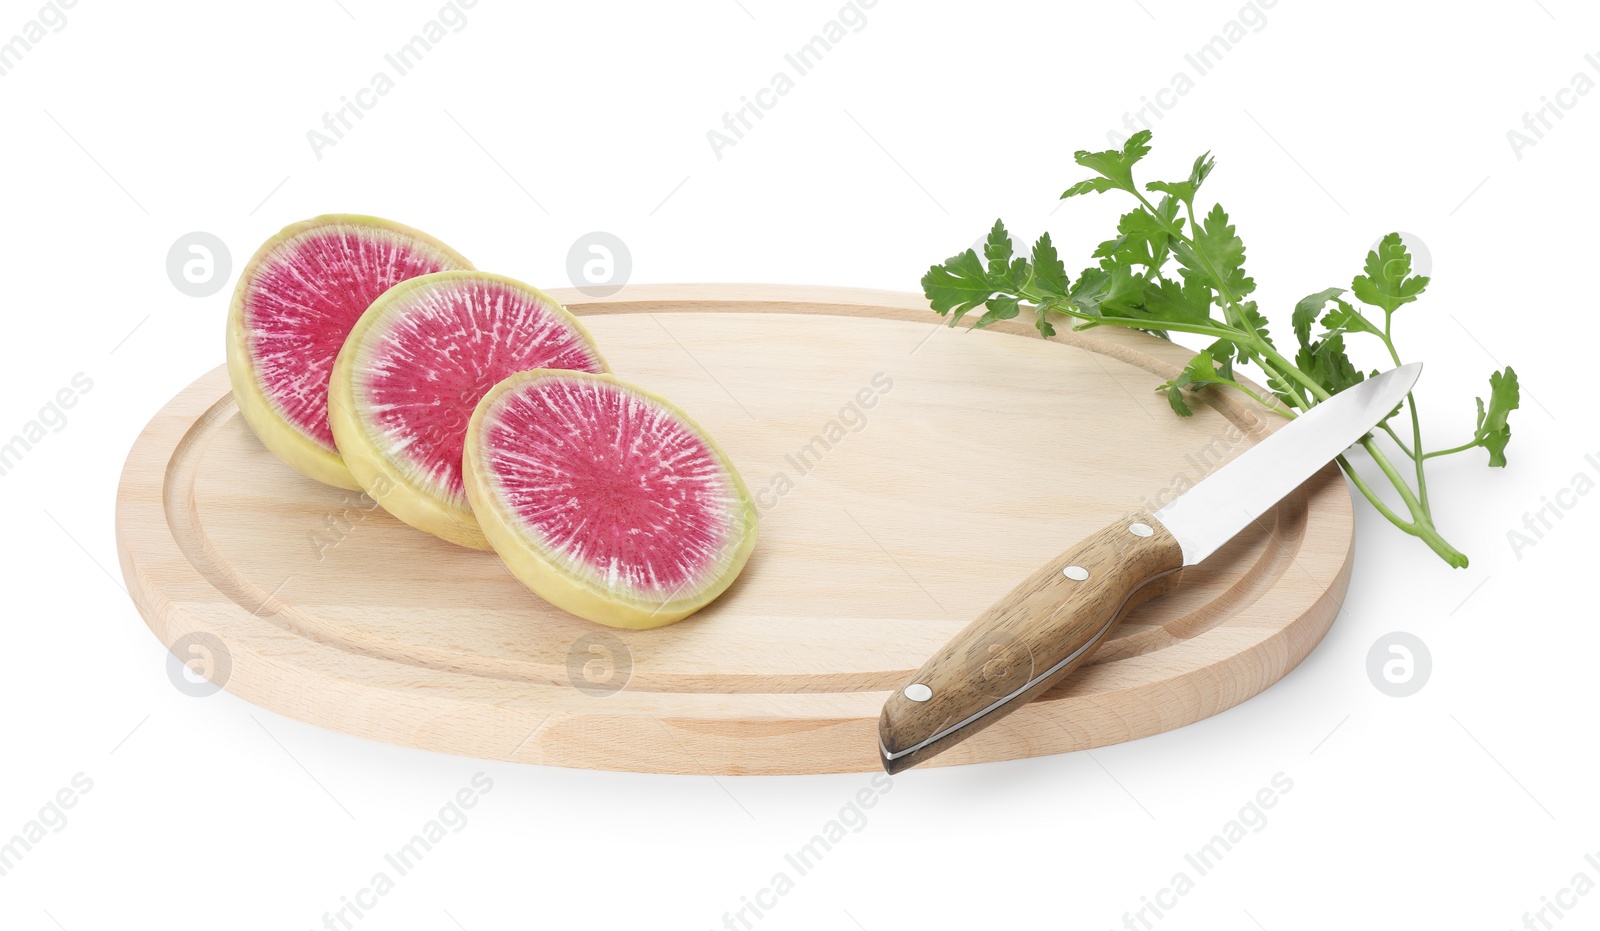 Photo of Wooden cutting board with fresh red meat radish, parsley and knife isolated on white